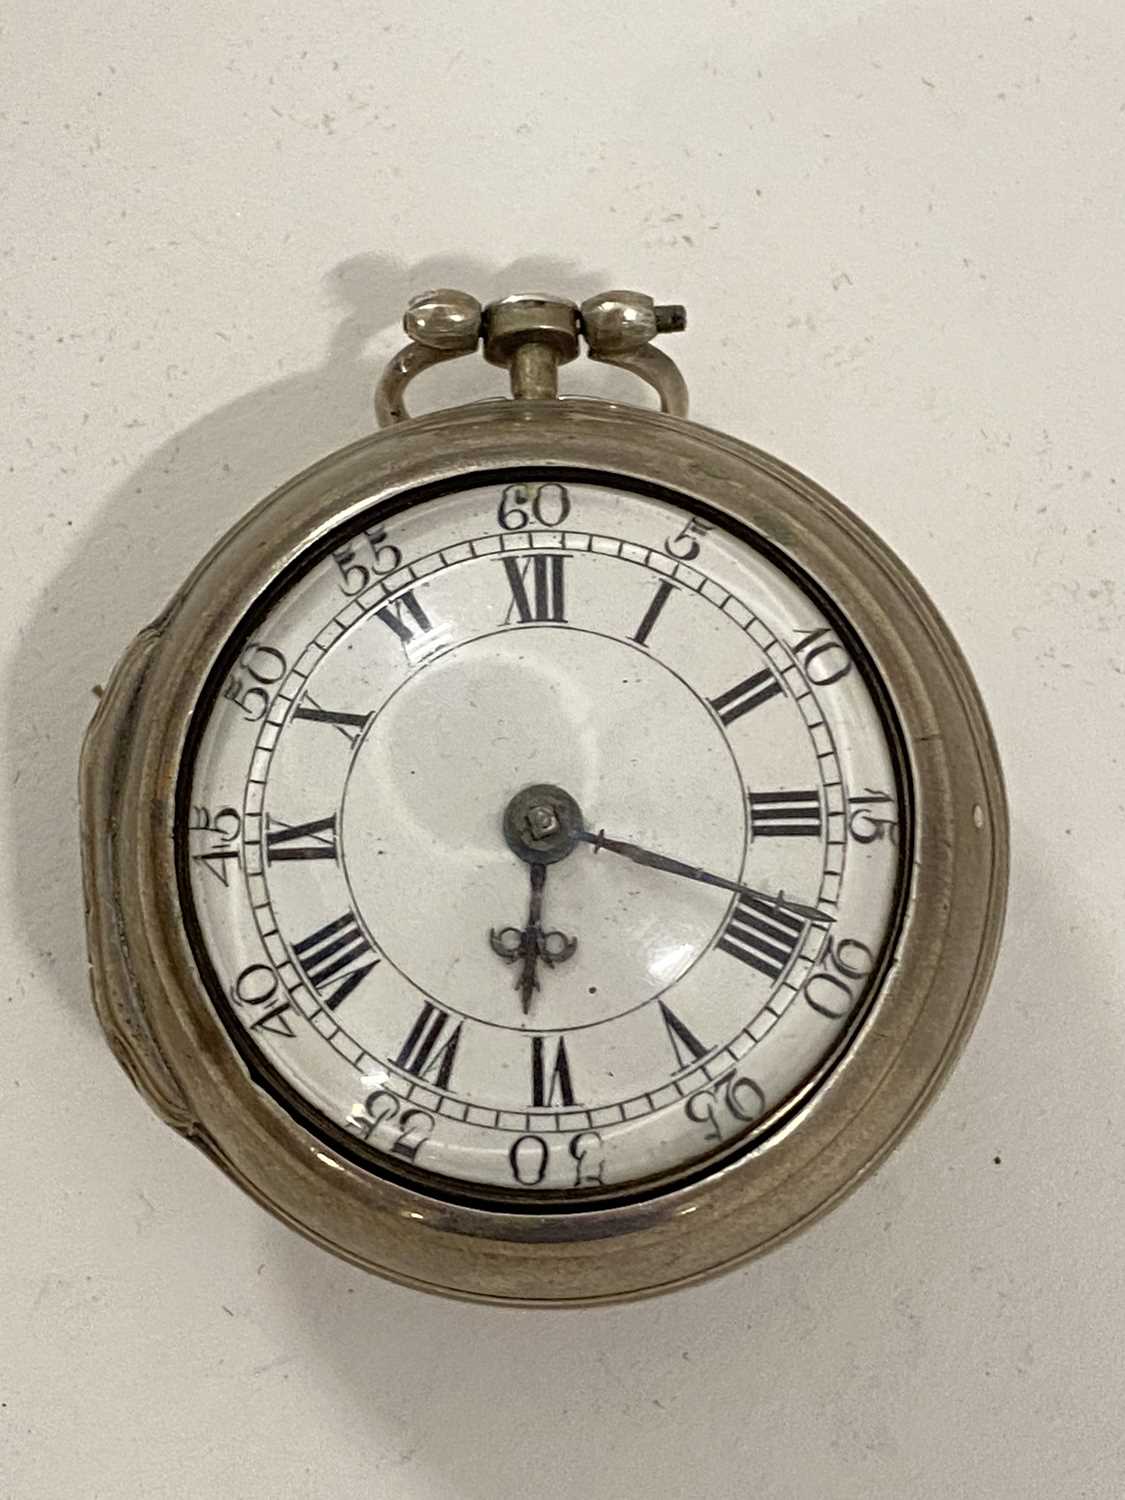 Jas Holroyd, Leeds, 18th Century silver cased verge pocket watch, the case with poorly struck